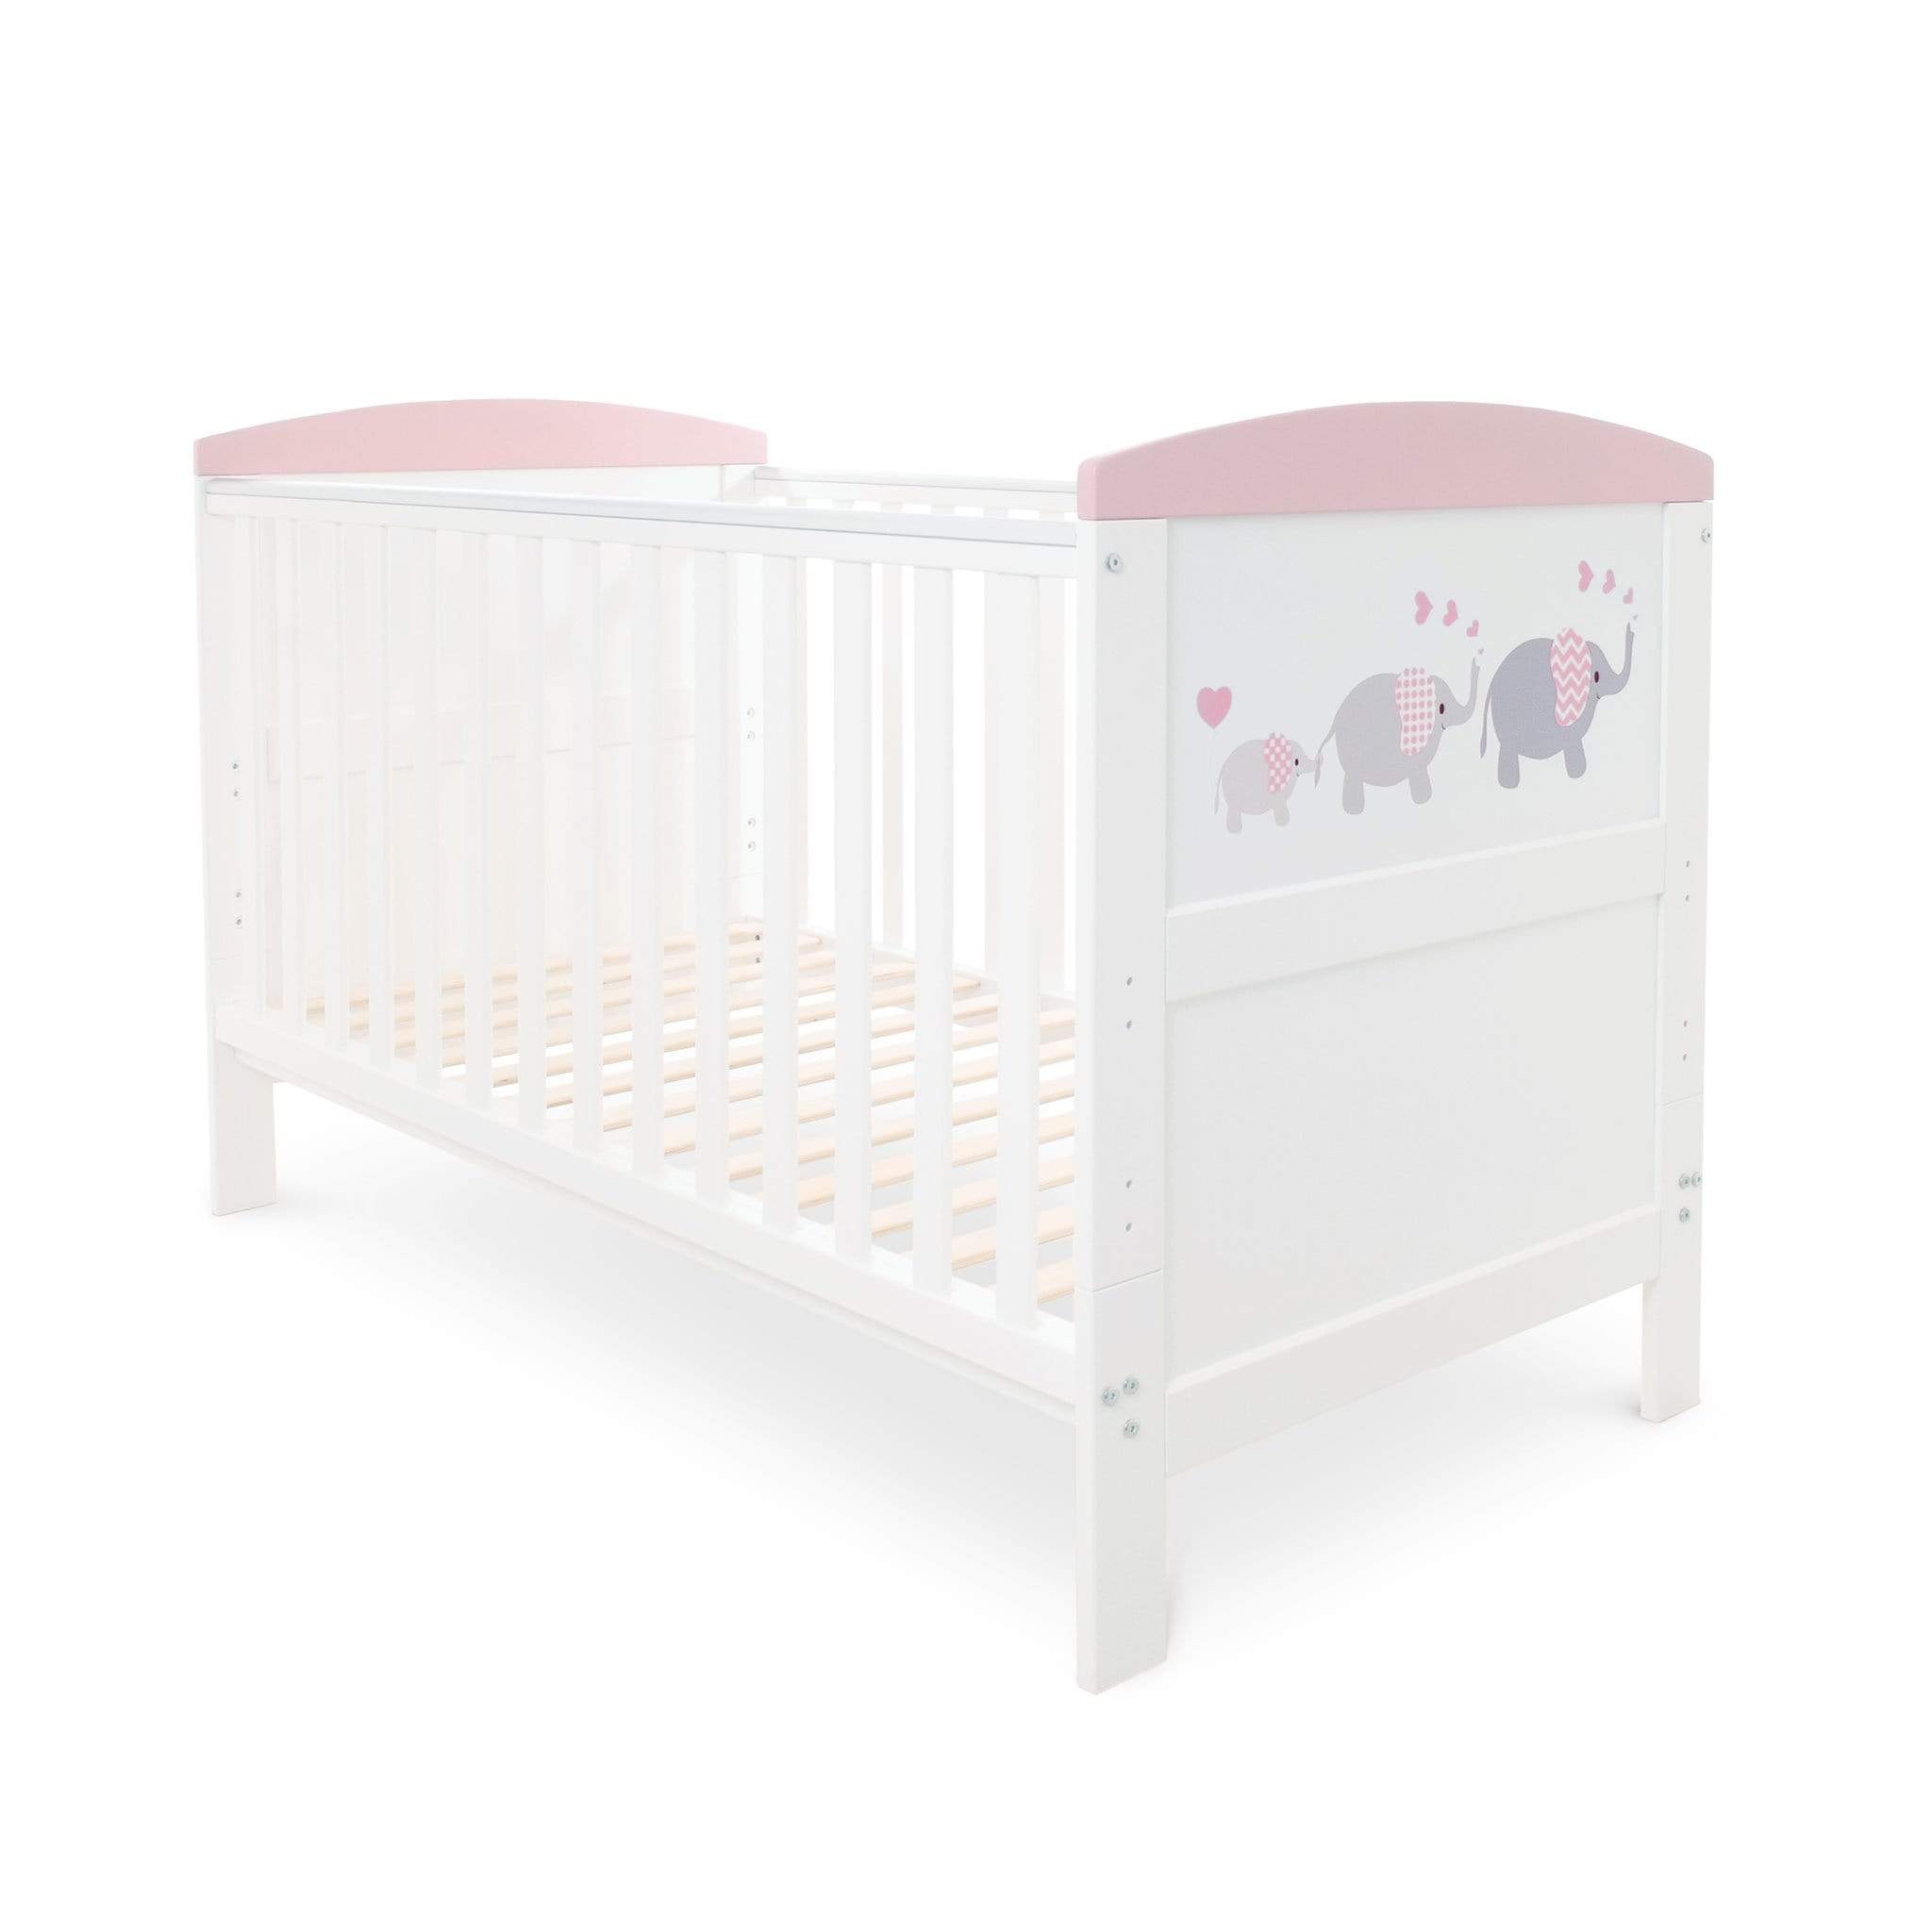 Ickle Bubba Coleby Style Cot Bed Elephant Love Pink Cot Beds 44-002-000-823 5060738070909